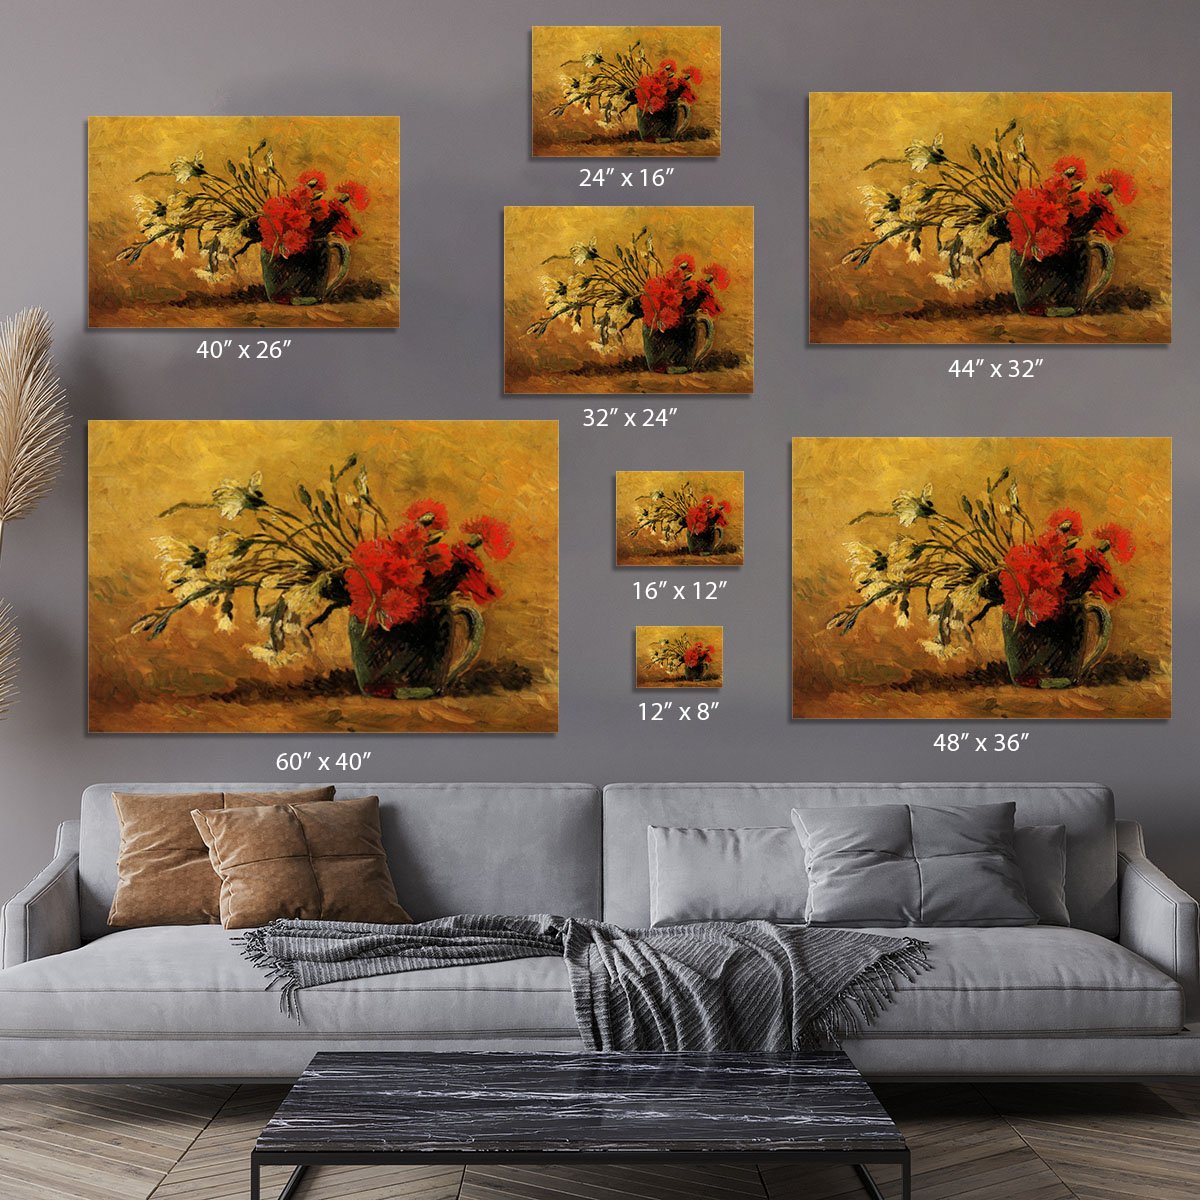 Vase with Red and White Carnations on Yellow Background by Van Gogh Canvas Print or Poster